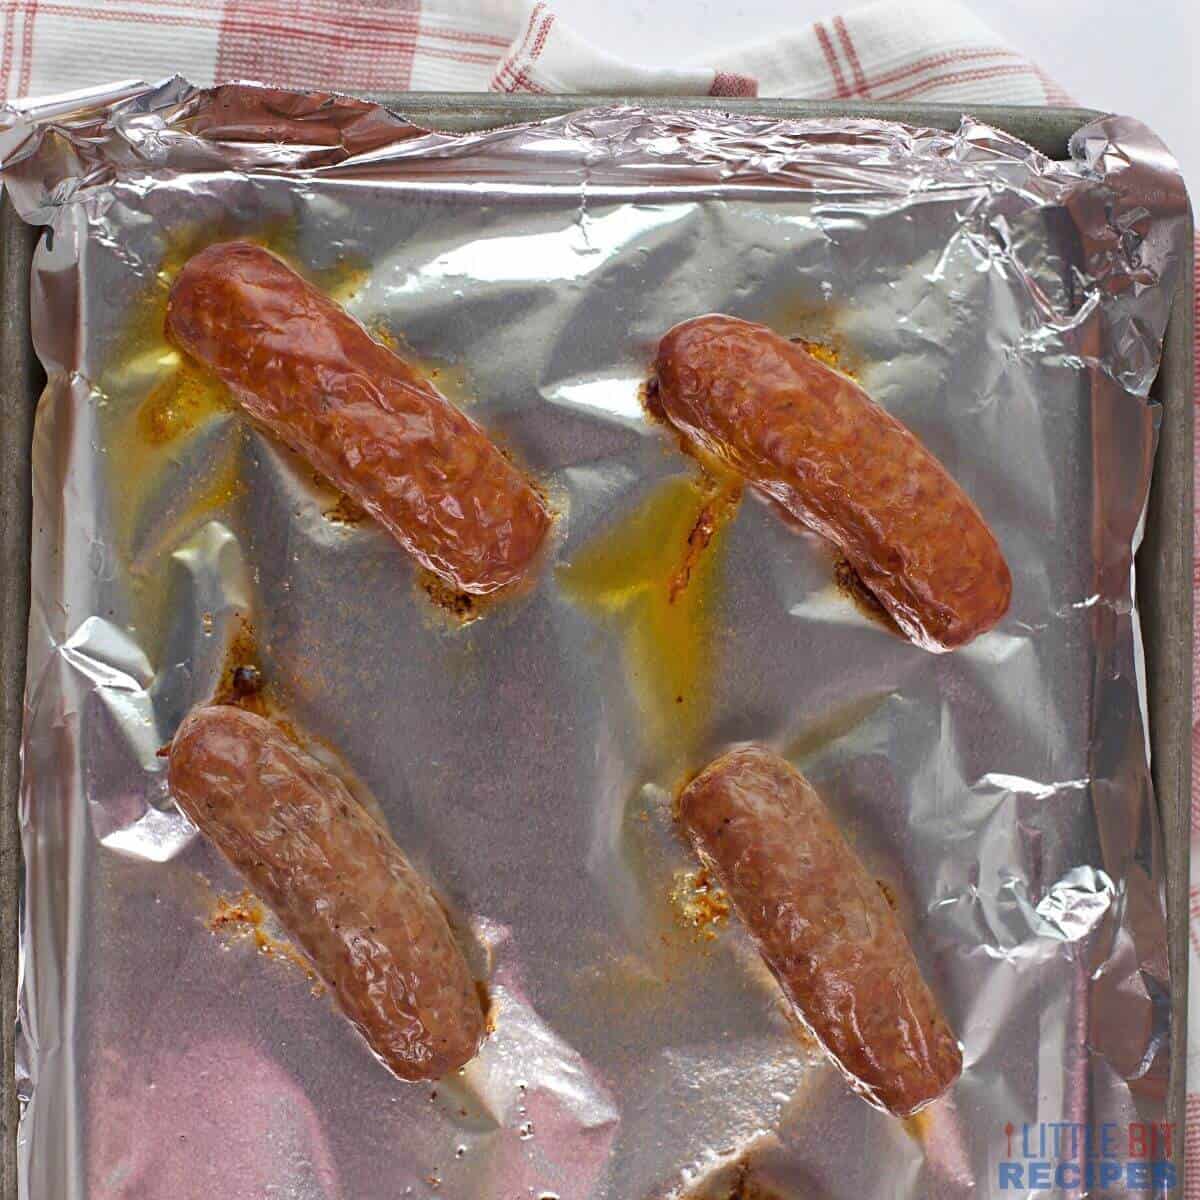 sausage cooked in oven on foil.